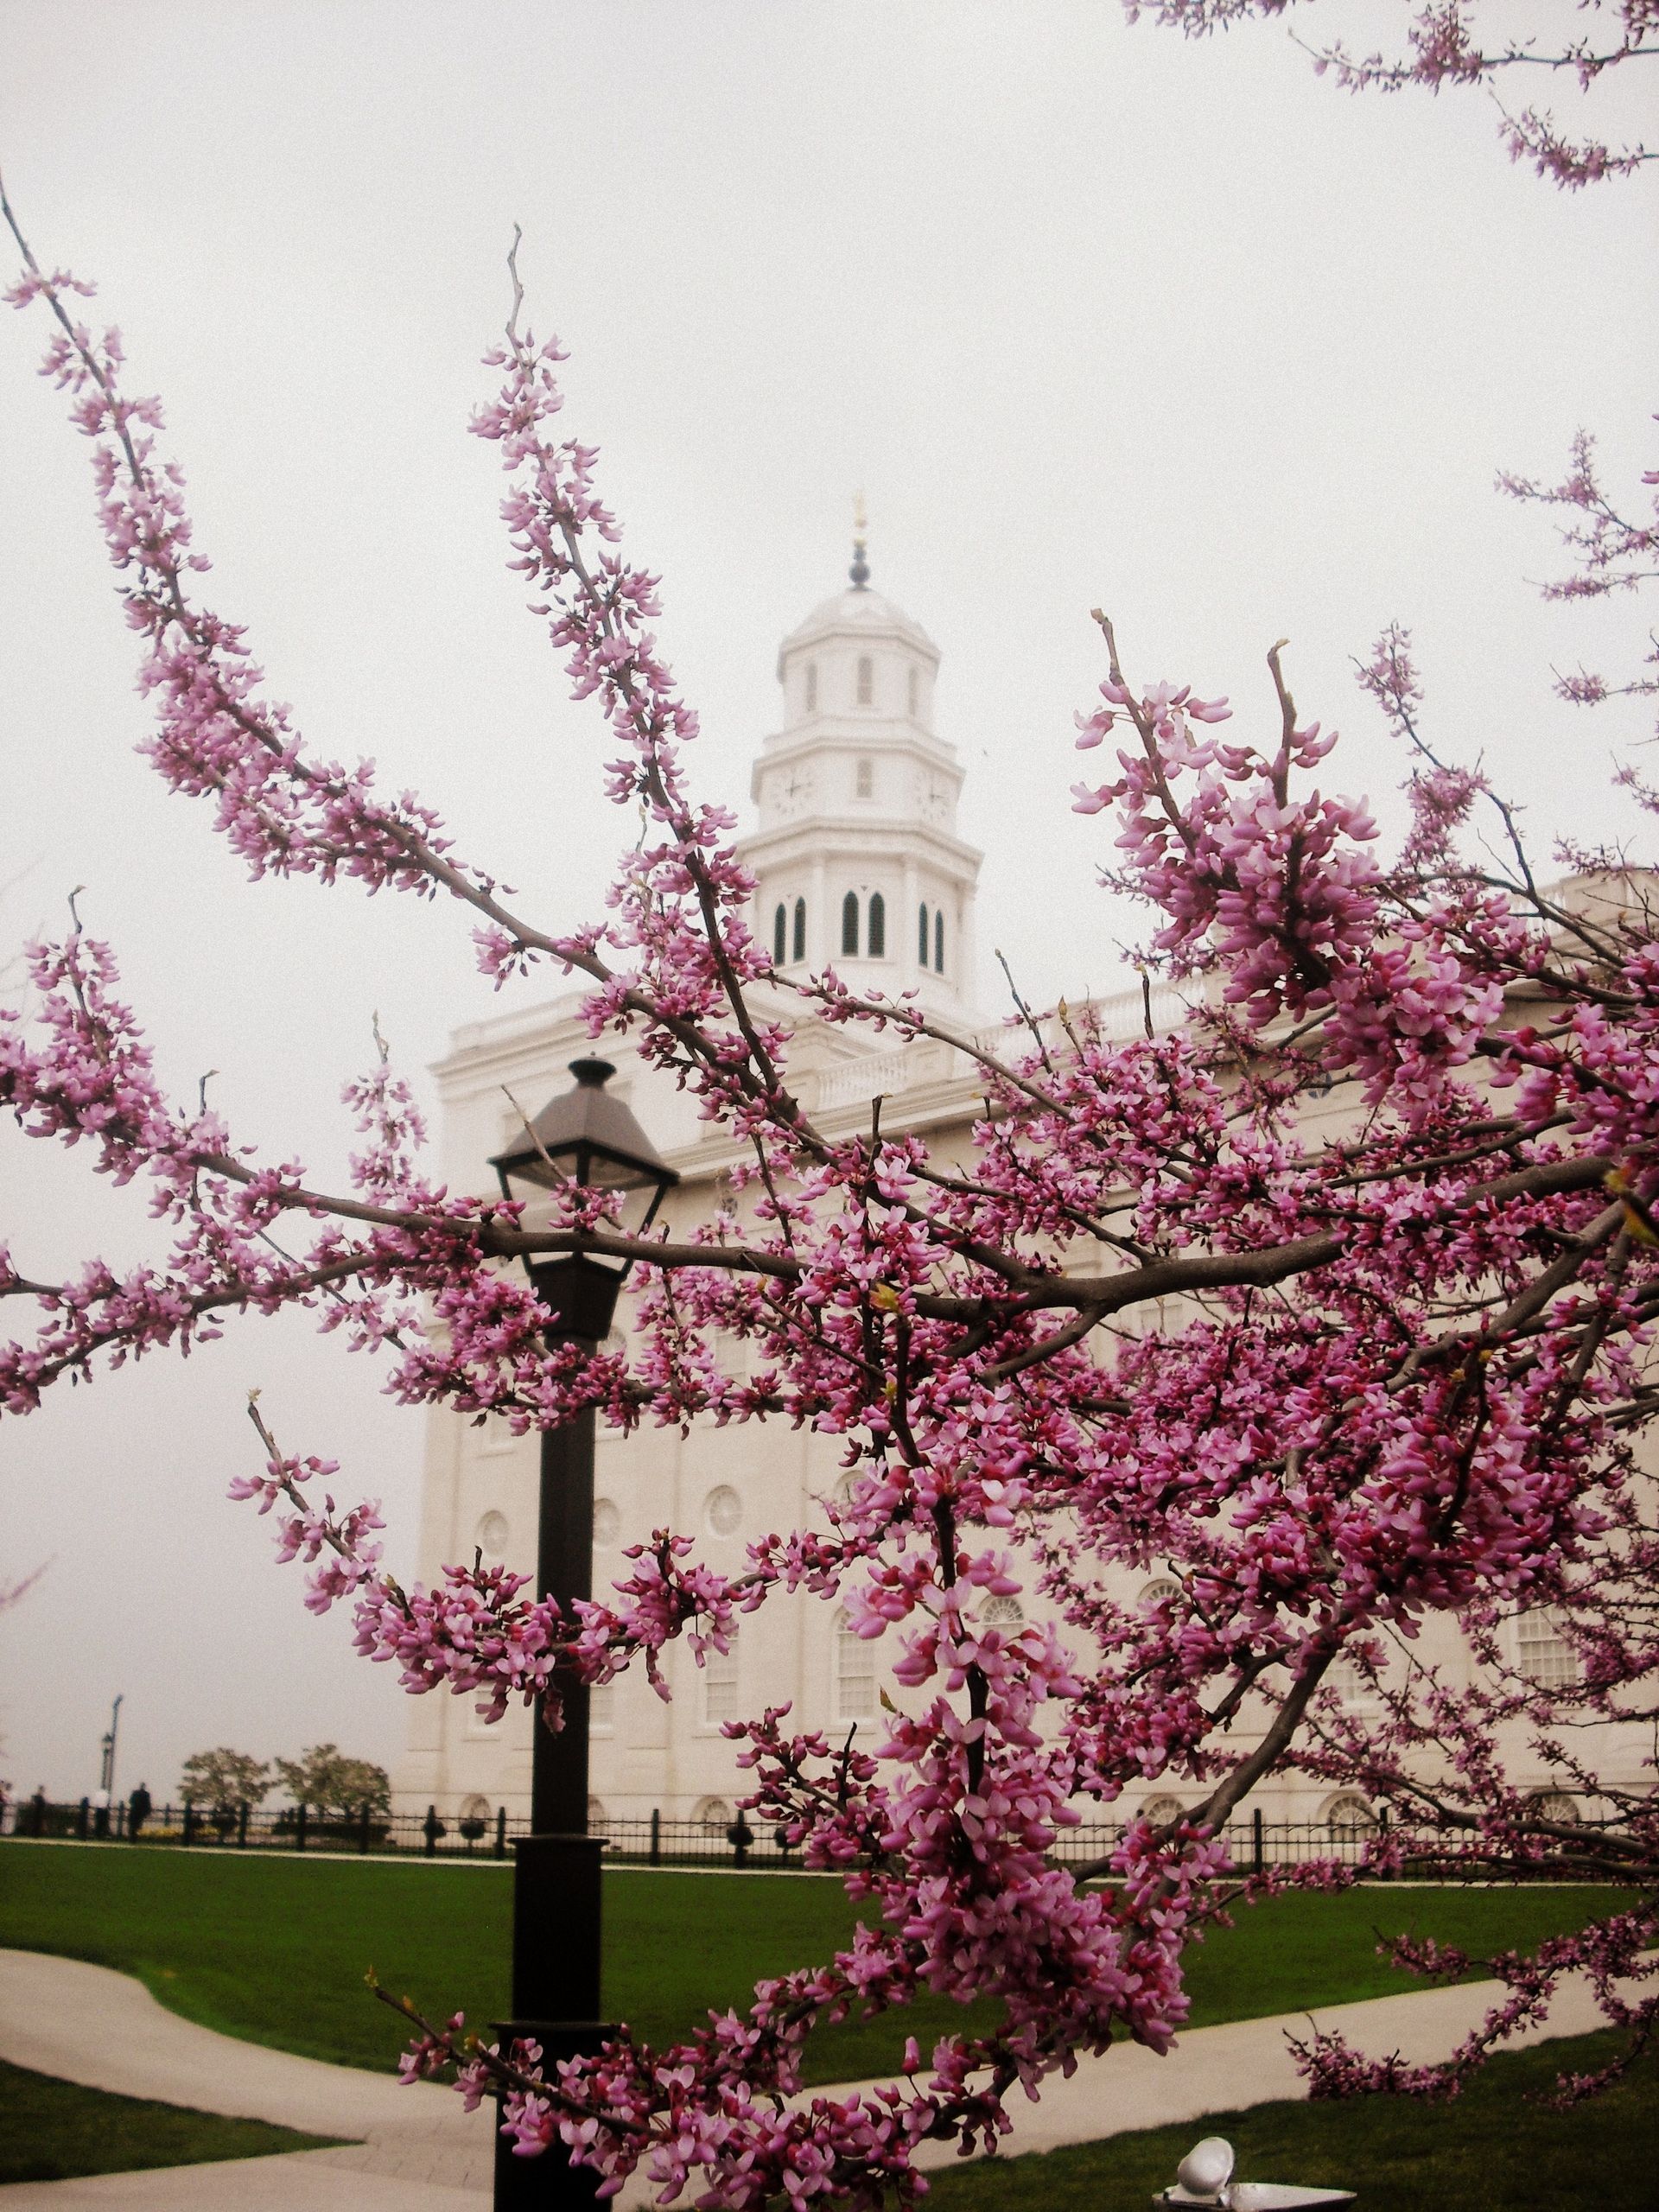 The Nauvoo Illinois Temple spire, including scenery.